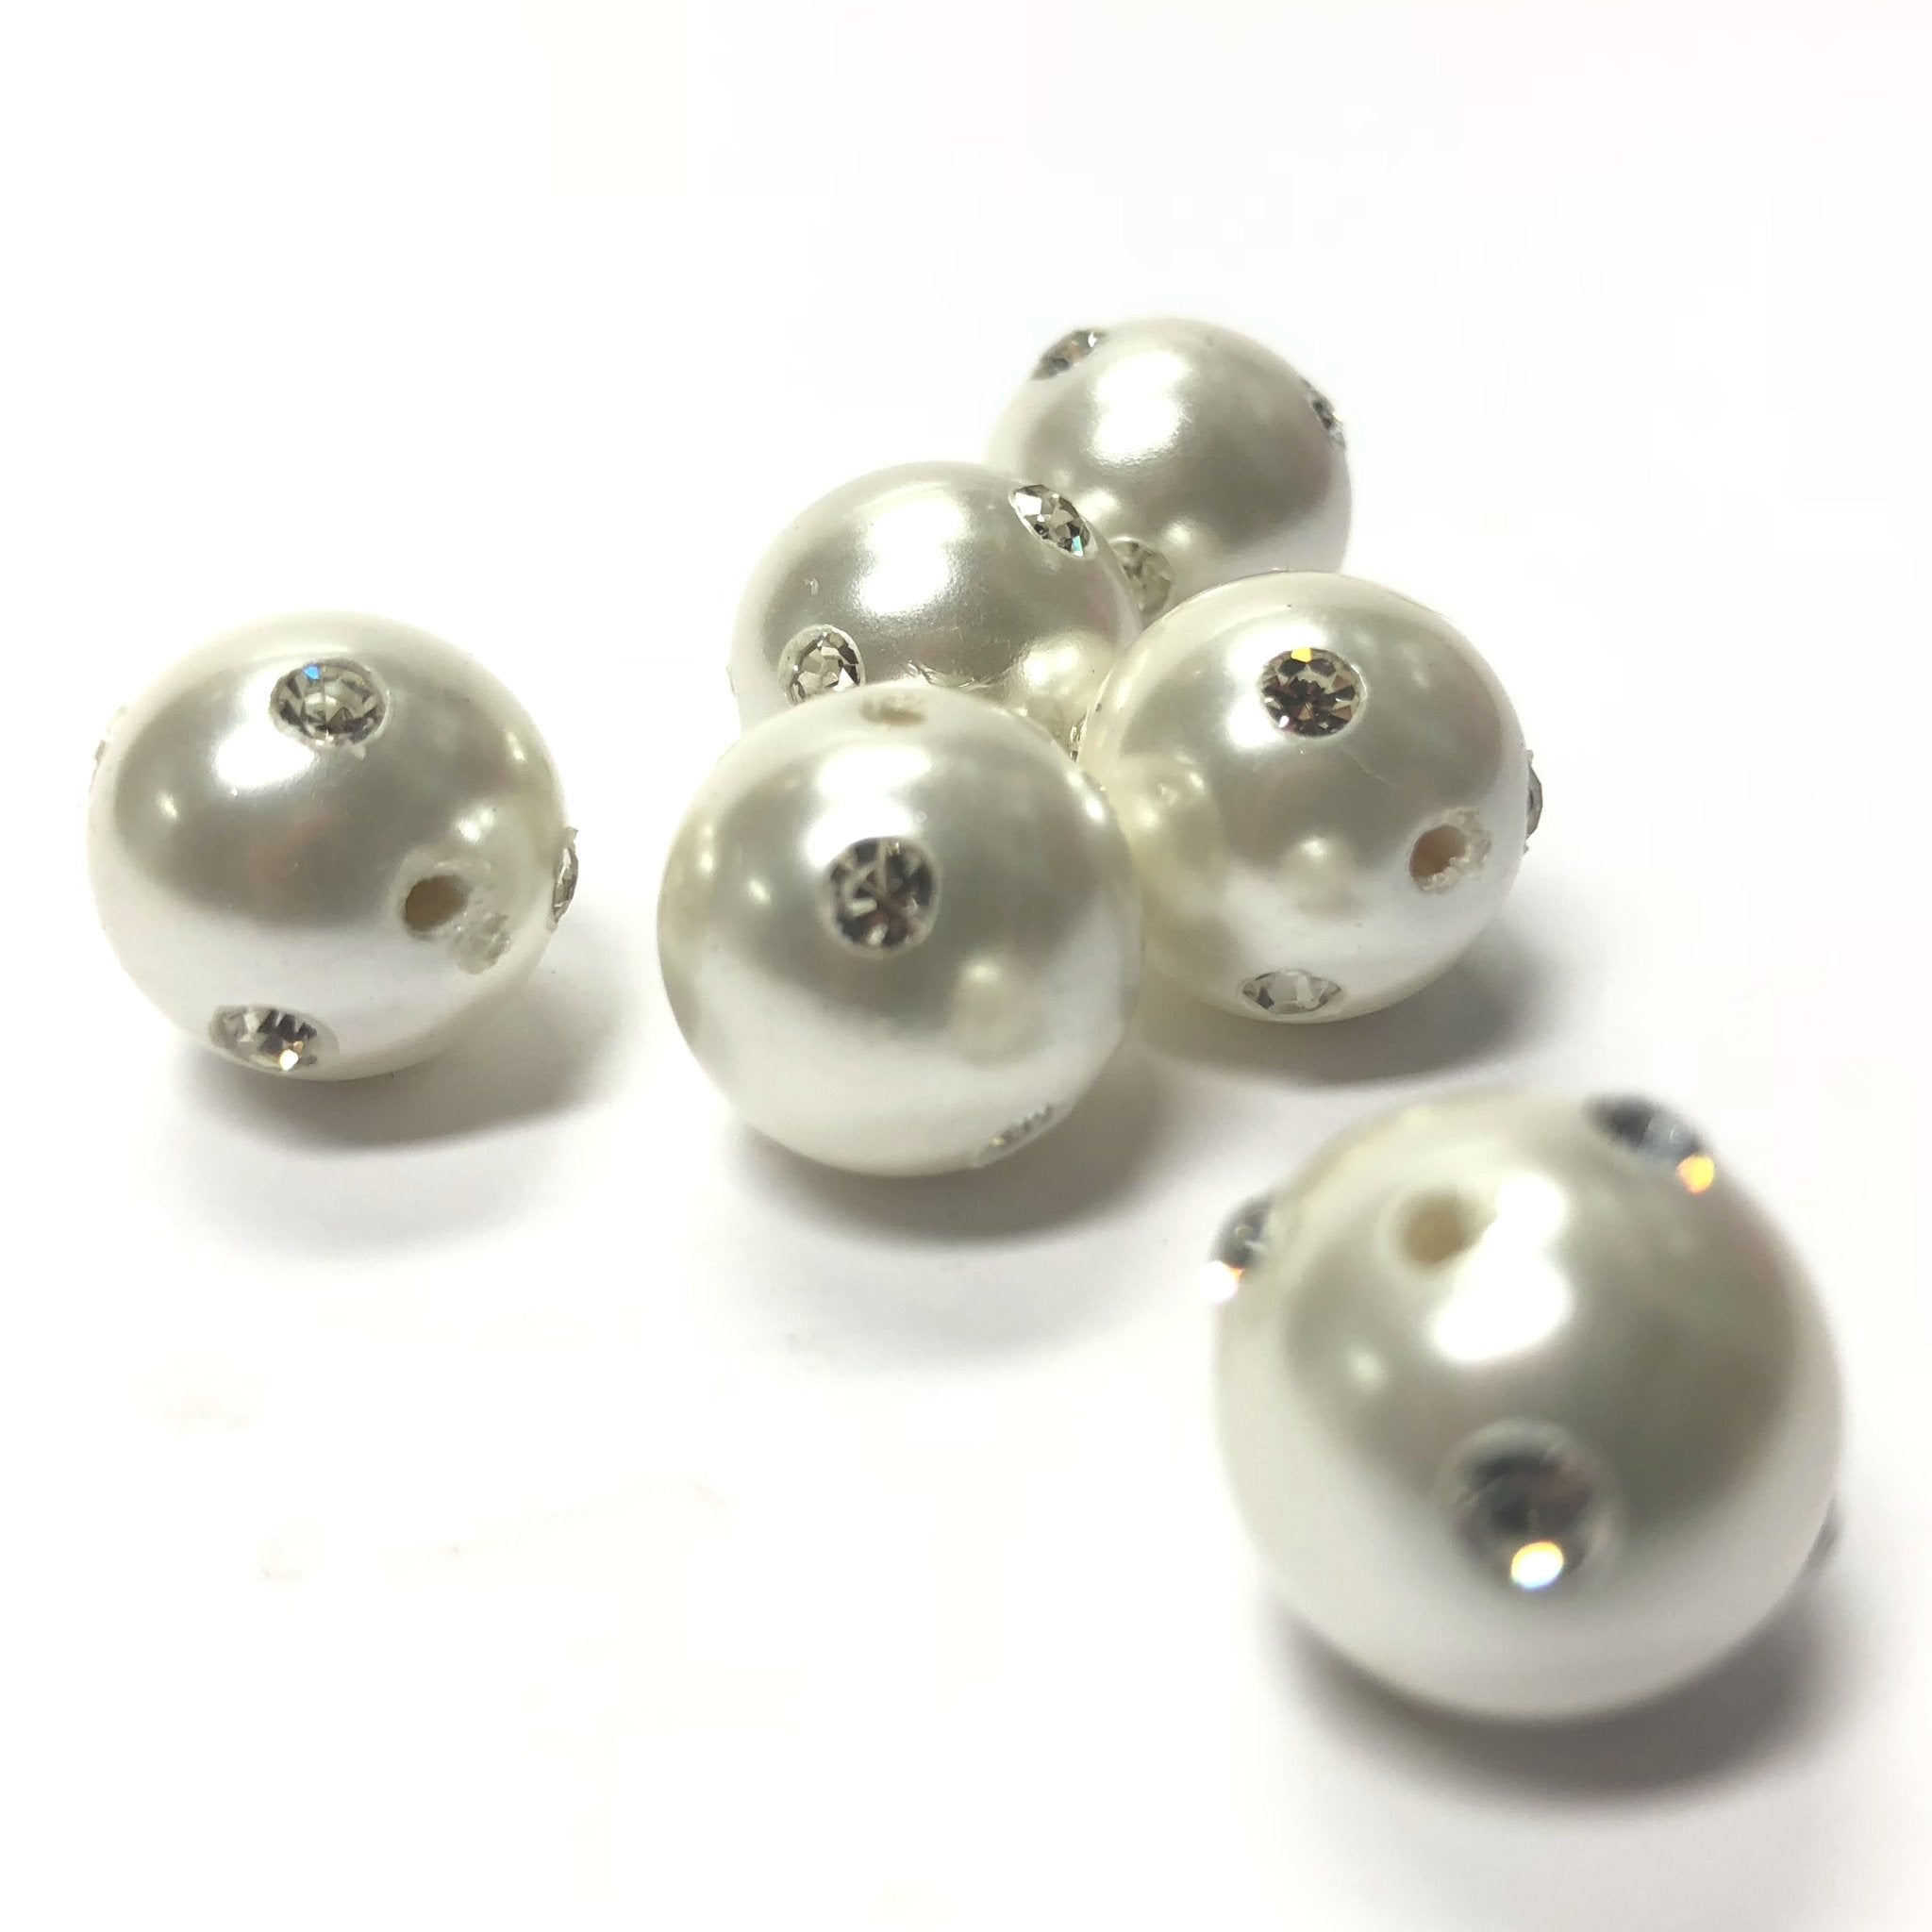 14MM White Pearl Bead With Crystal Chatons (6 pieces)